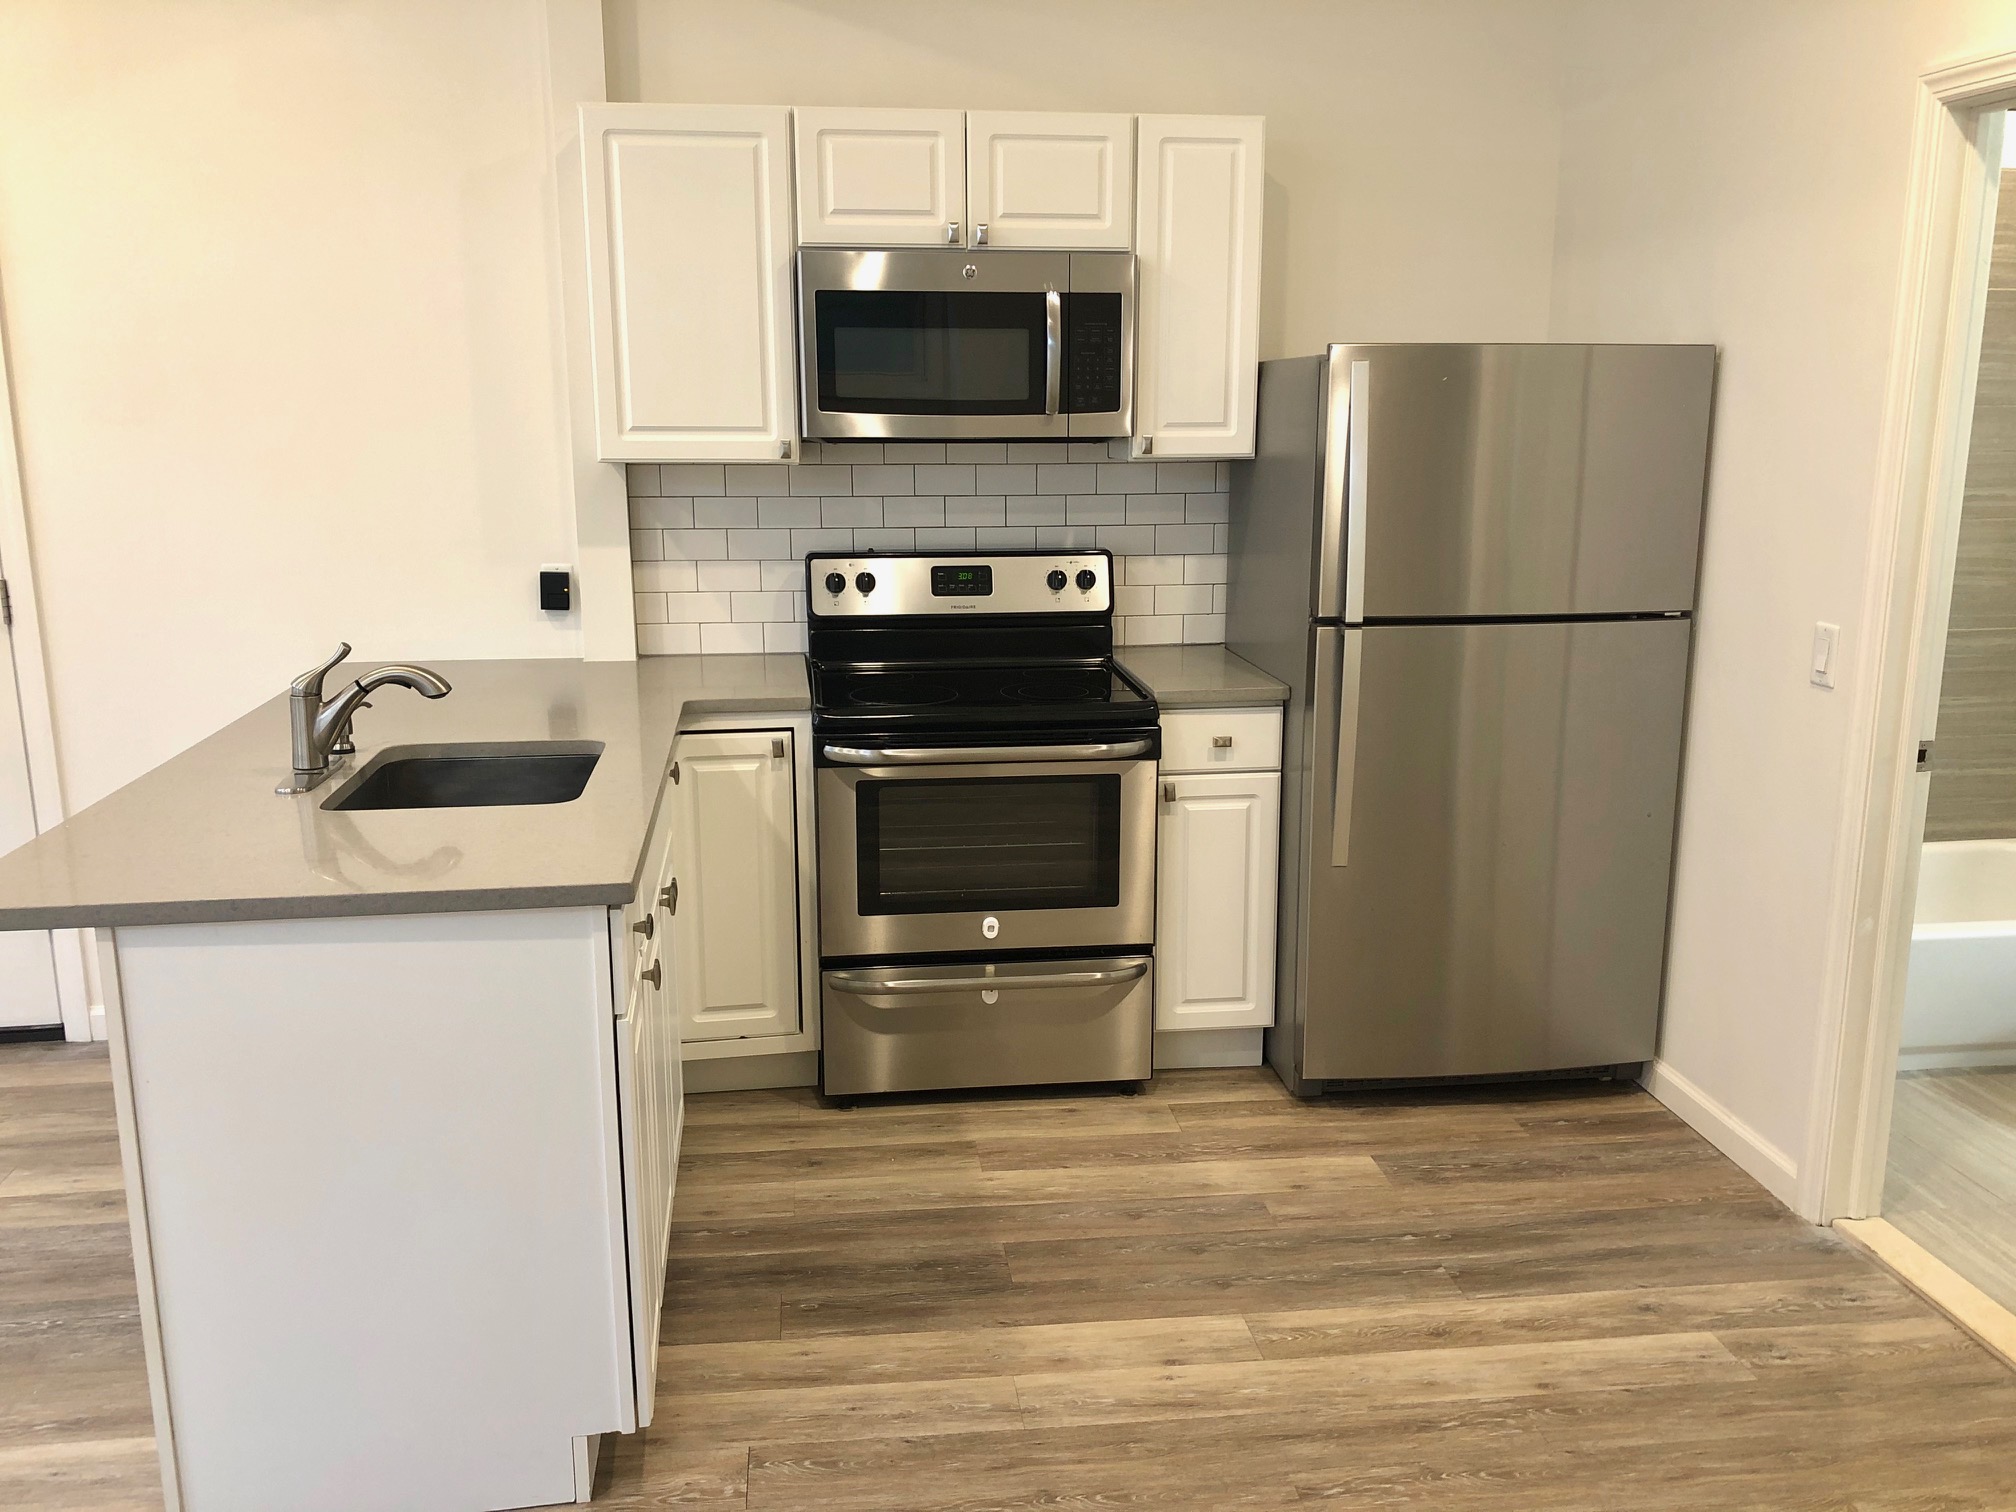 ***No broker fee & Parking Included***Amazing newly renovated 1 bedroom, 1 bath just steps from the Journal Sq Path Station! The apartment features new kitchen with stainless steel appliances, quartz countertops, all new tiles and hardwood floors. Unit also features a beautiful backyard, free laundry in the basement and one parking spot in front of the building included with rent. This apartment is a rare find. **price is based on an amortized rent with a free month on a 13 month lease**